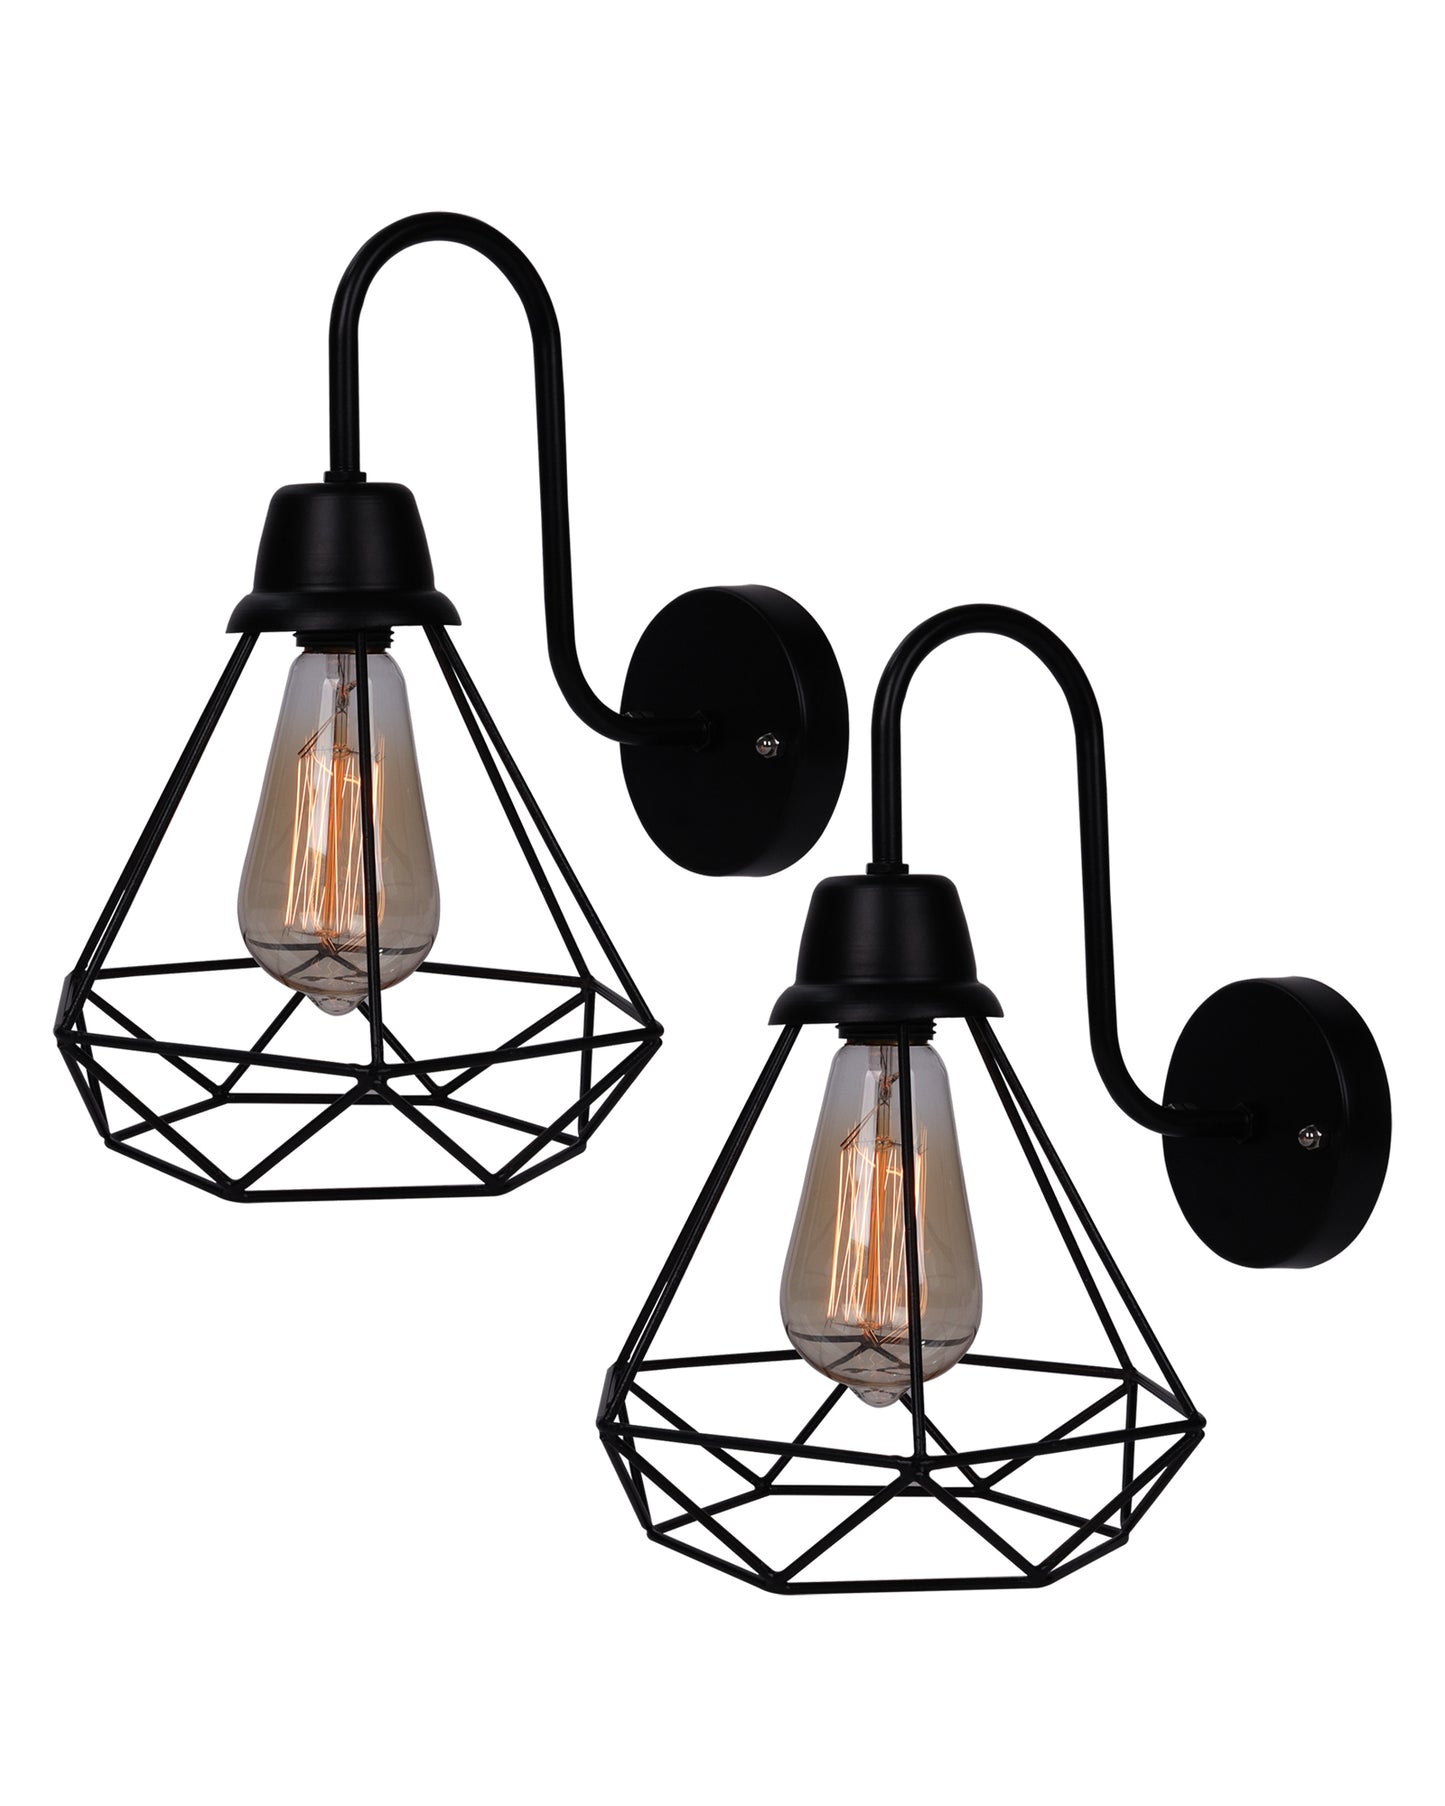 Farmhouse Metal Diamond Cage Vanity Industrial Wall Sconce Lighting, Edison Rustic Wall Light Fixture for Balcony, Living Room, Lobby, set of 2